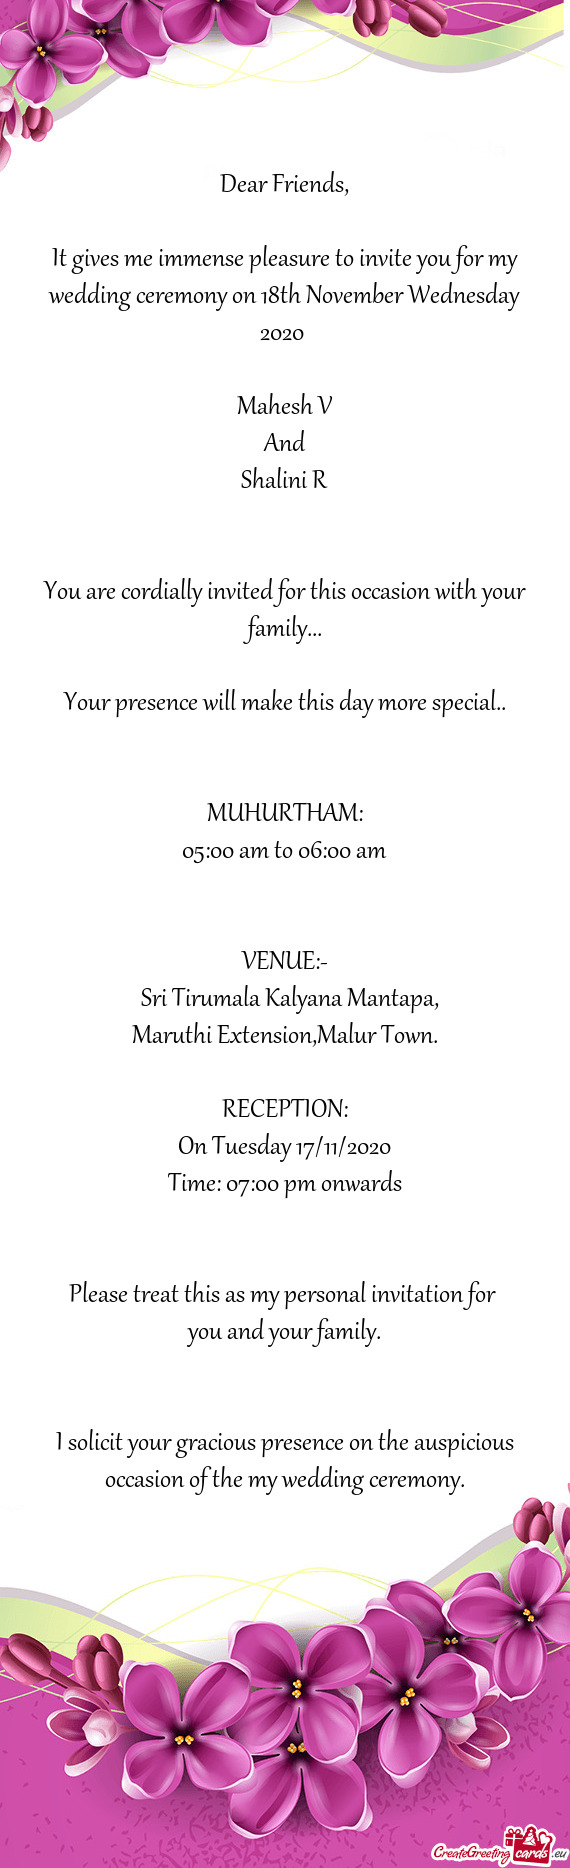 It gives me immense pleasure to invite you for my wedding ceremony on 18th November Wednesday 2020